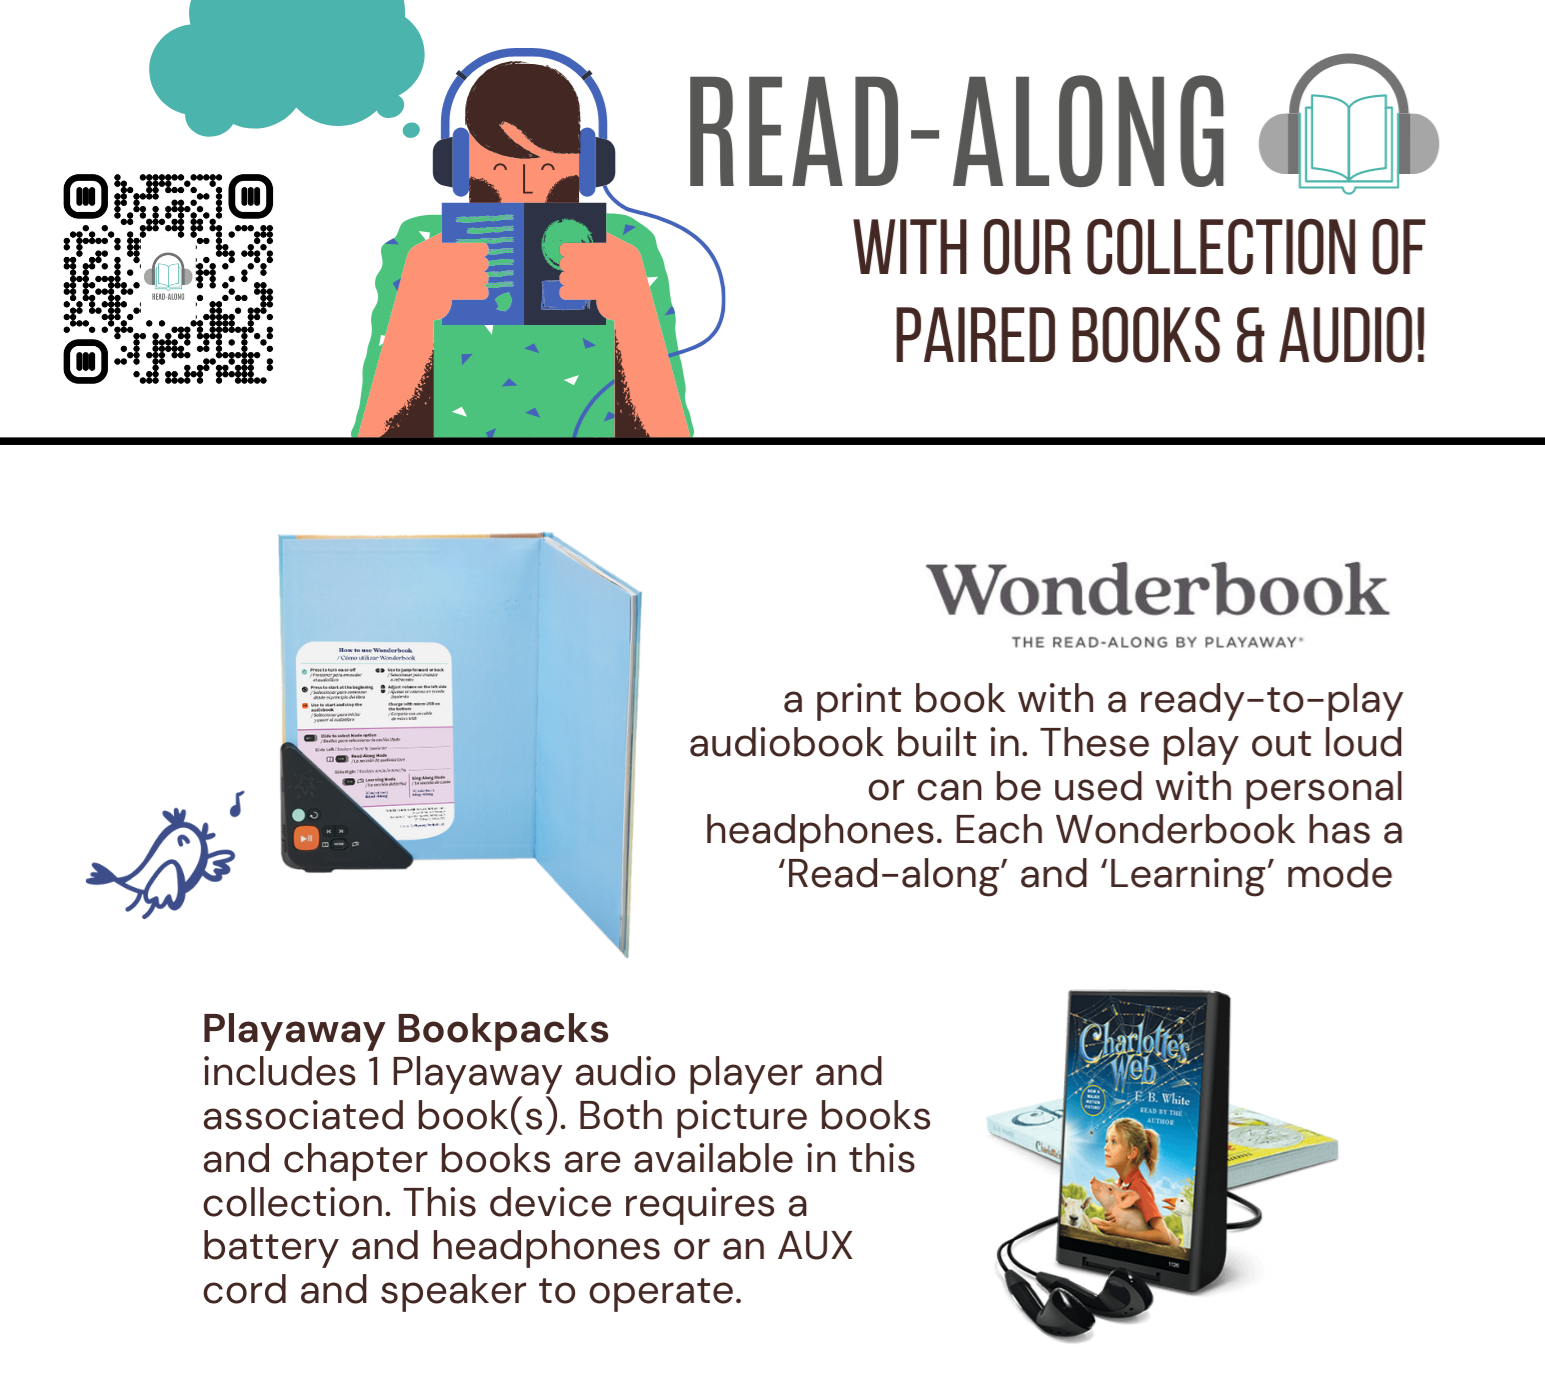 Read-Along with our collection of paired books and audio with a graphic of a person wearing headphones and reading a book, a brief description of a Wonderbook, and Playaway Bookpacks